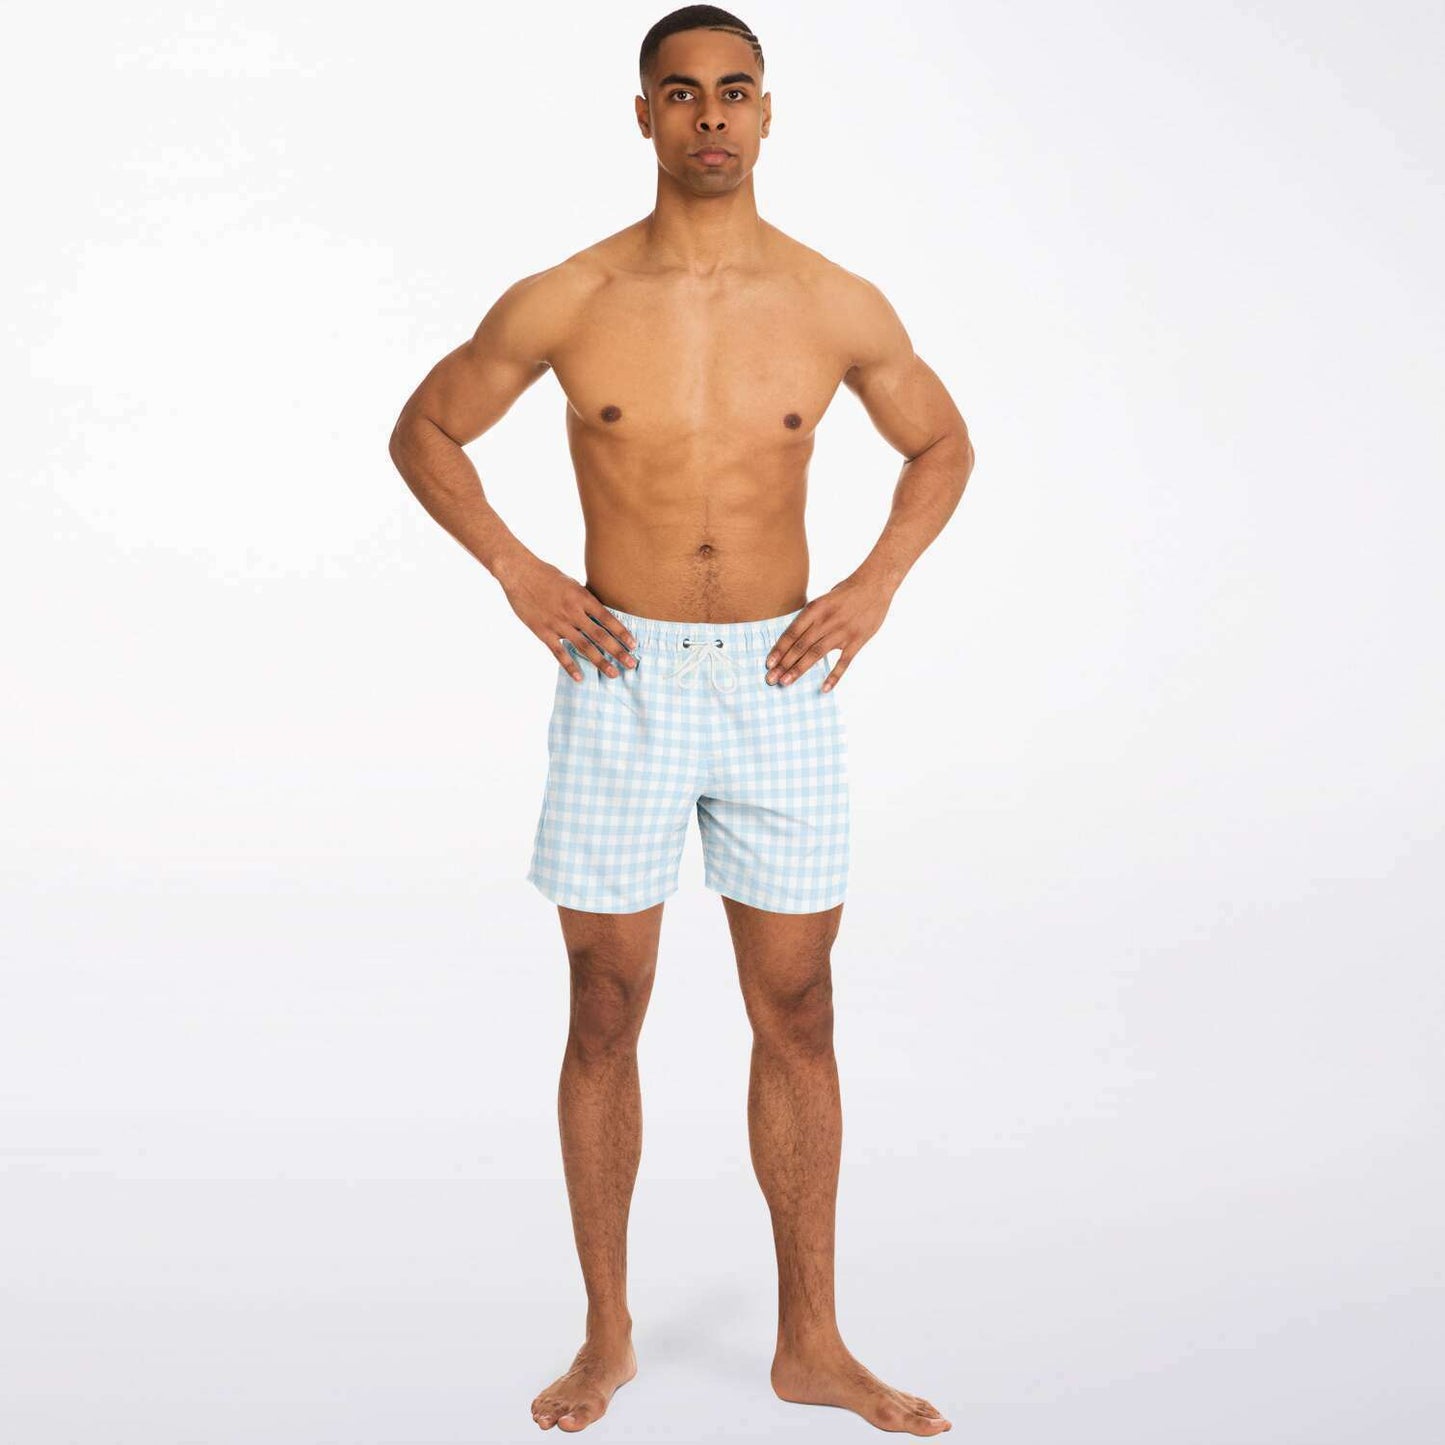 Load image into Gallery viewer, Pale Blue Gingham Check Swim Shorts
